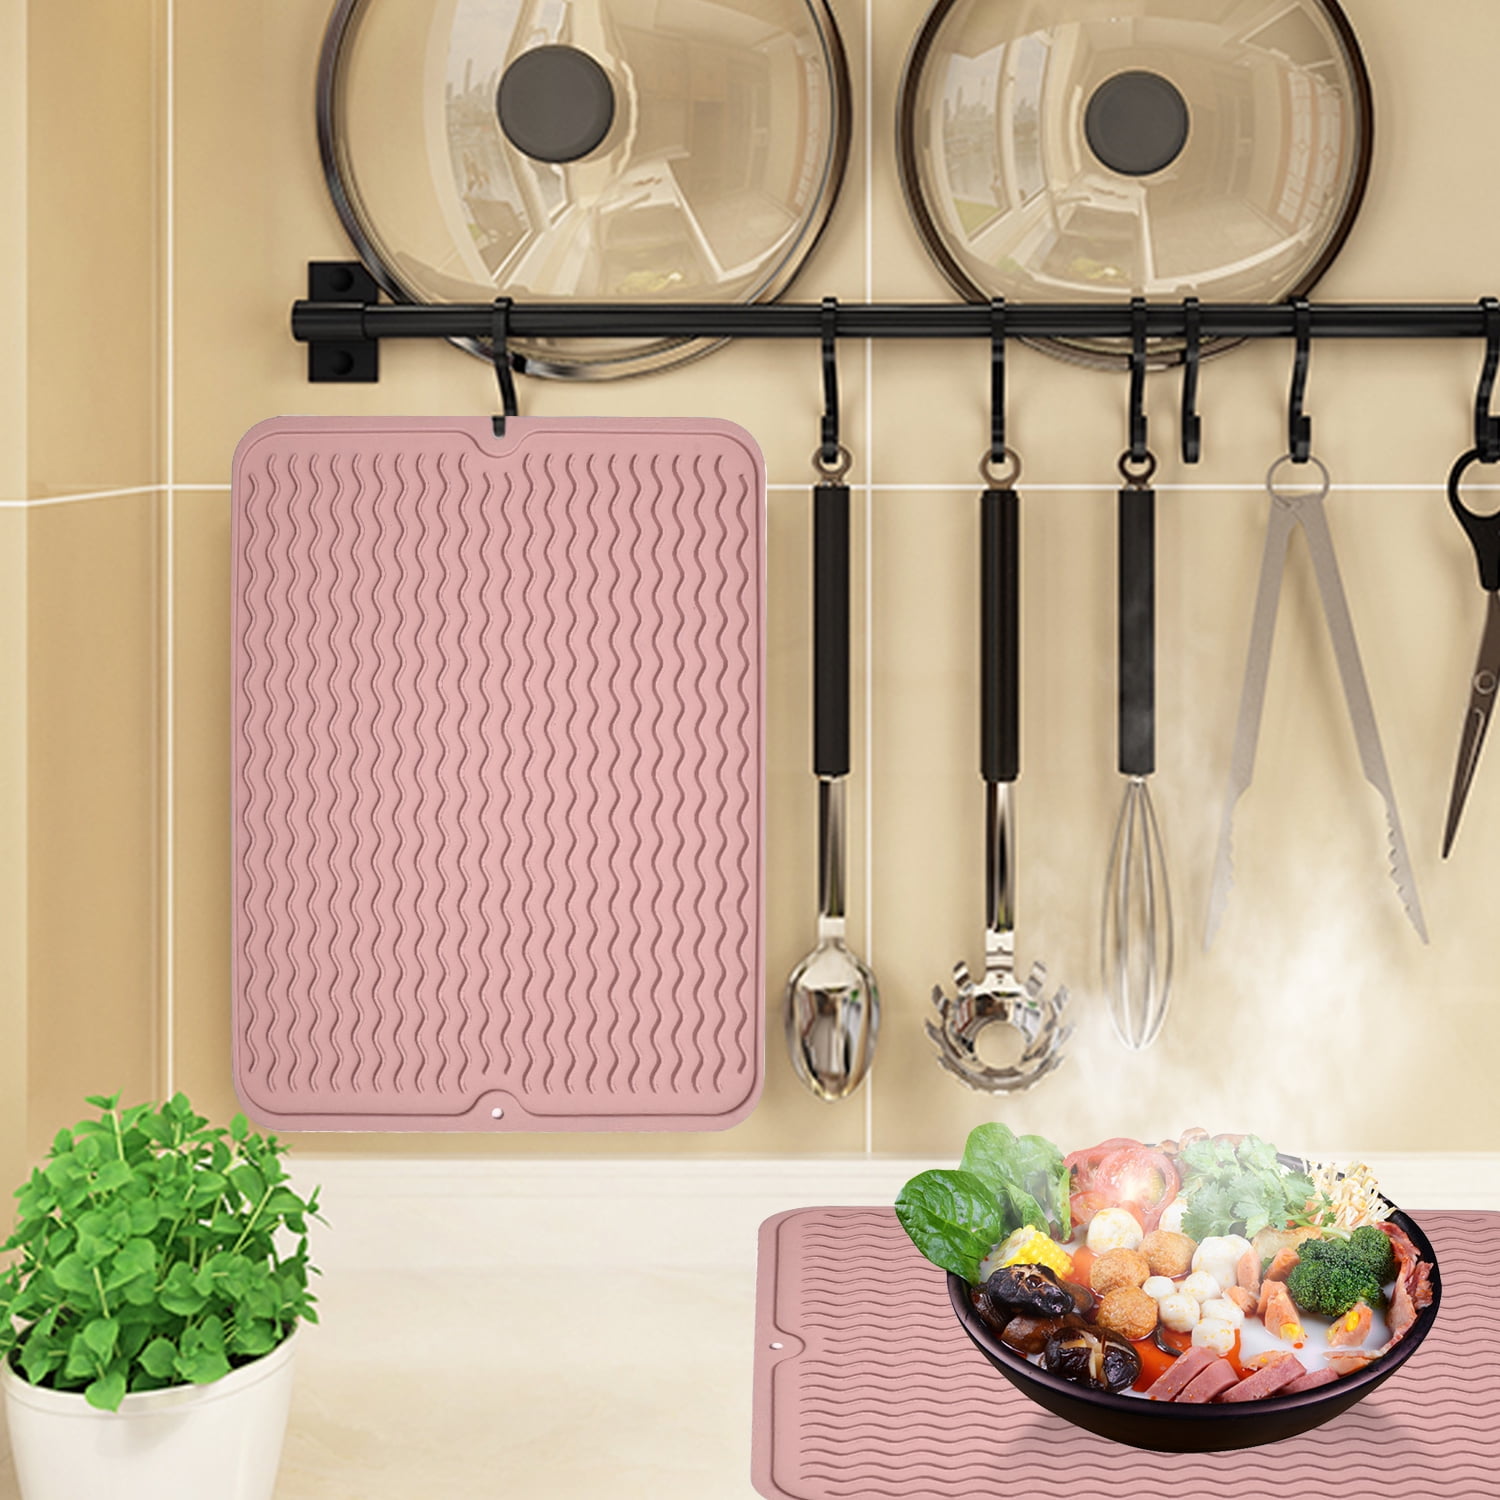 Kitchen Draining Mat in Silicone by CKS Zeal - Vibrant Home